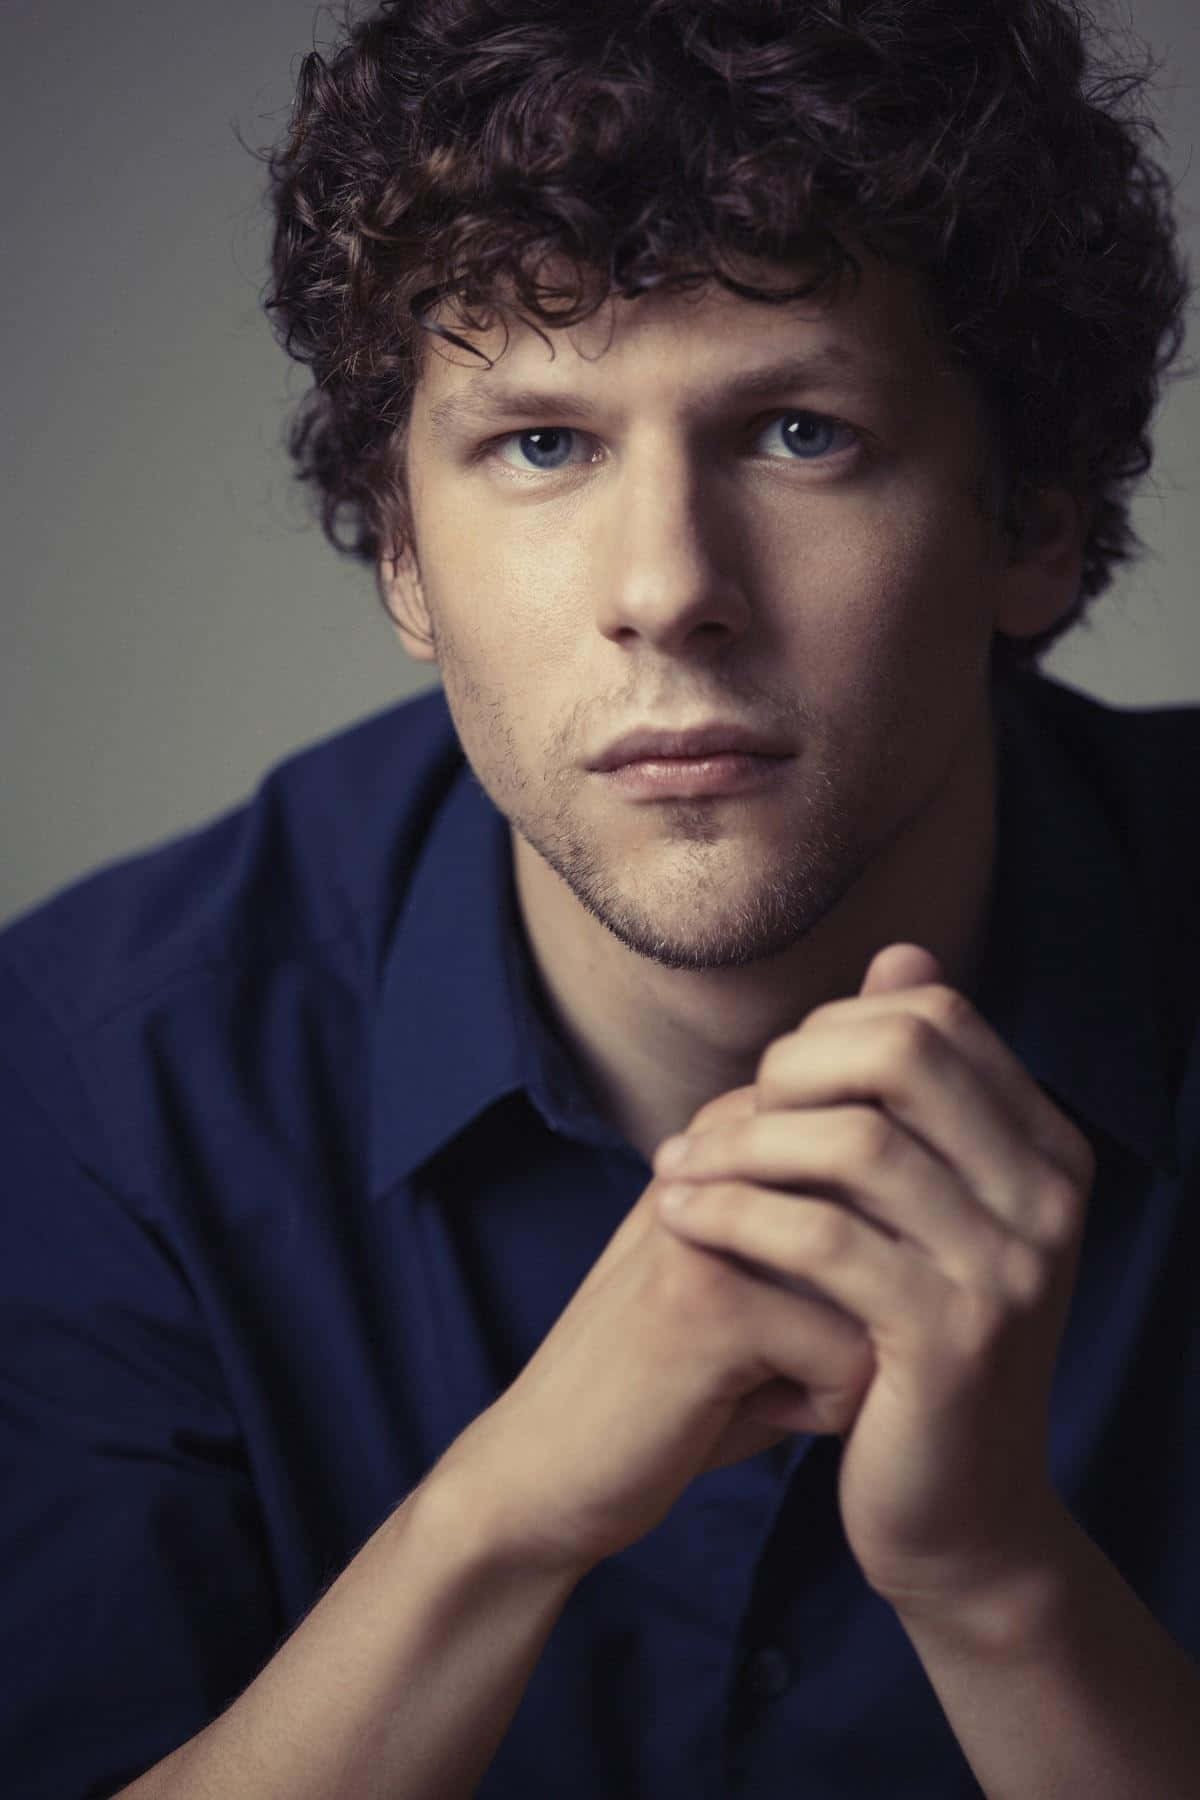 Jesseeisenberg Is An American Actor. He Is Best Known For His Role As Mark Zuckerberg In The Film 